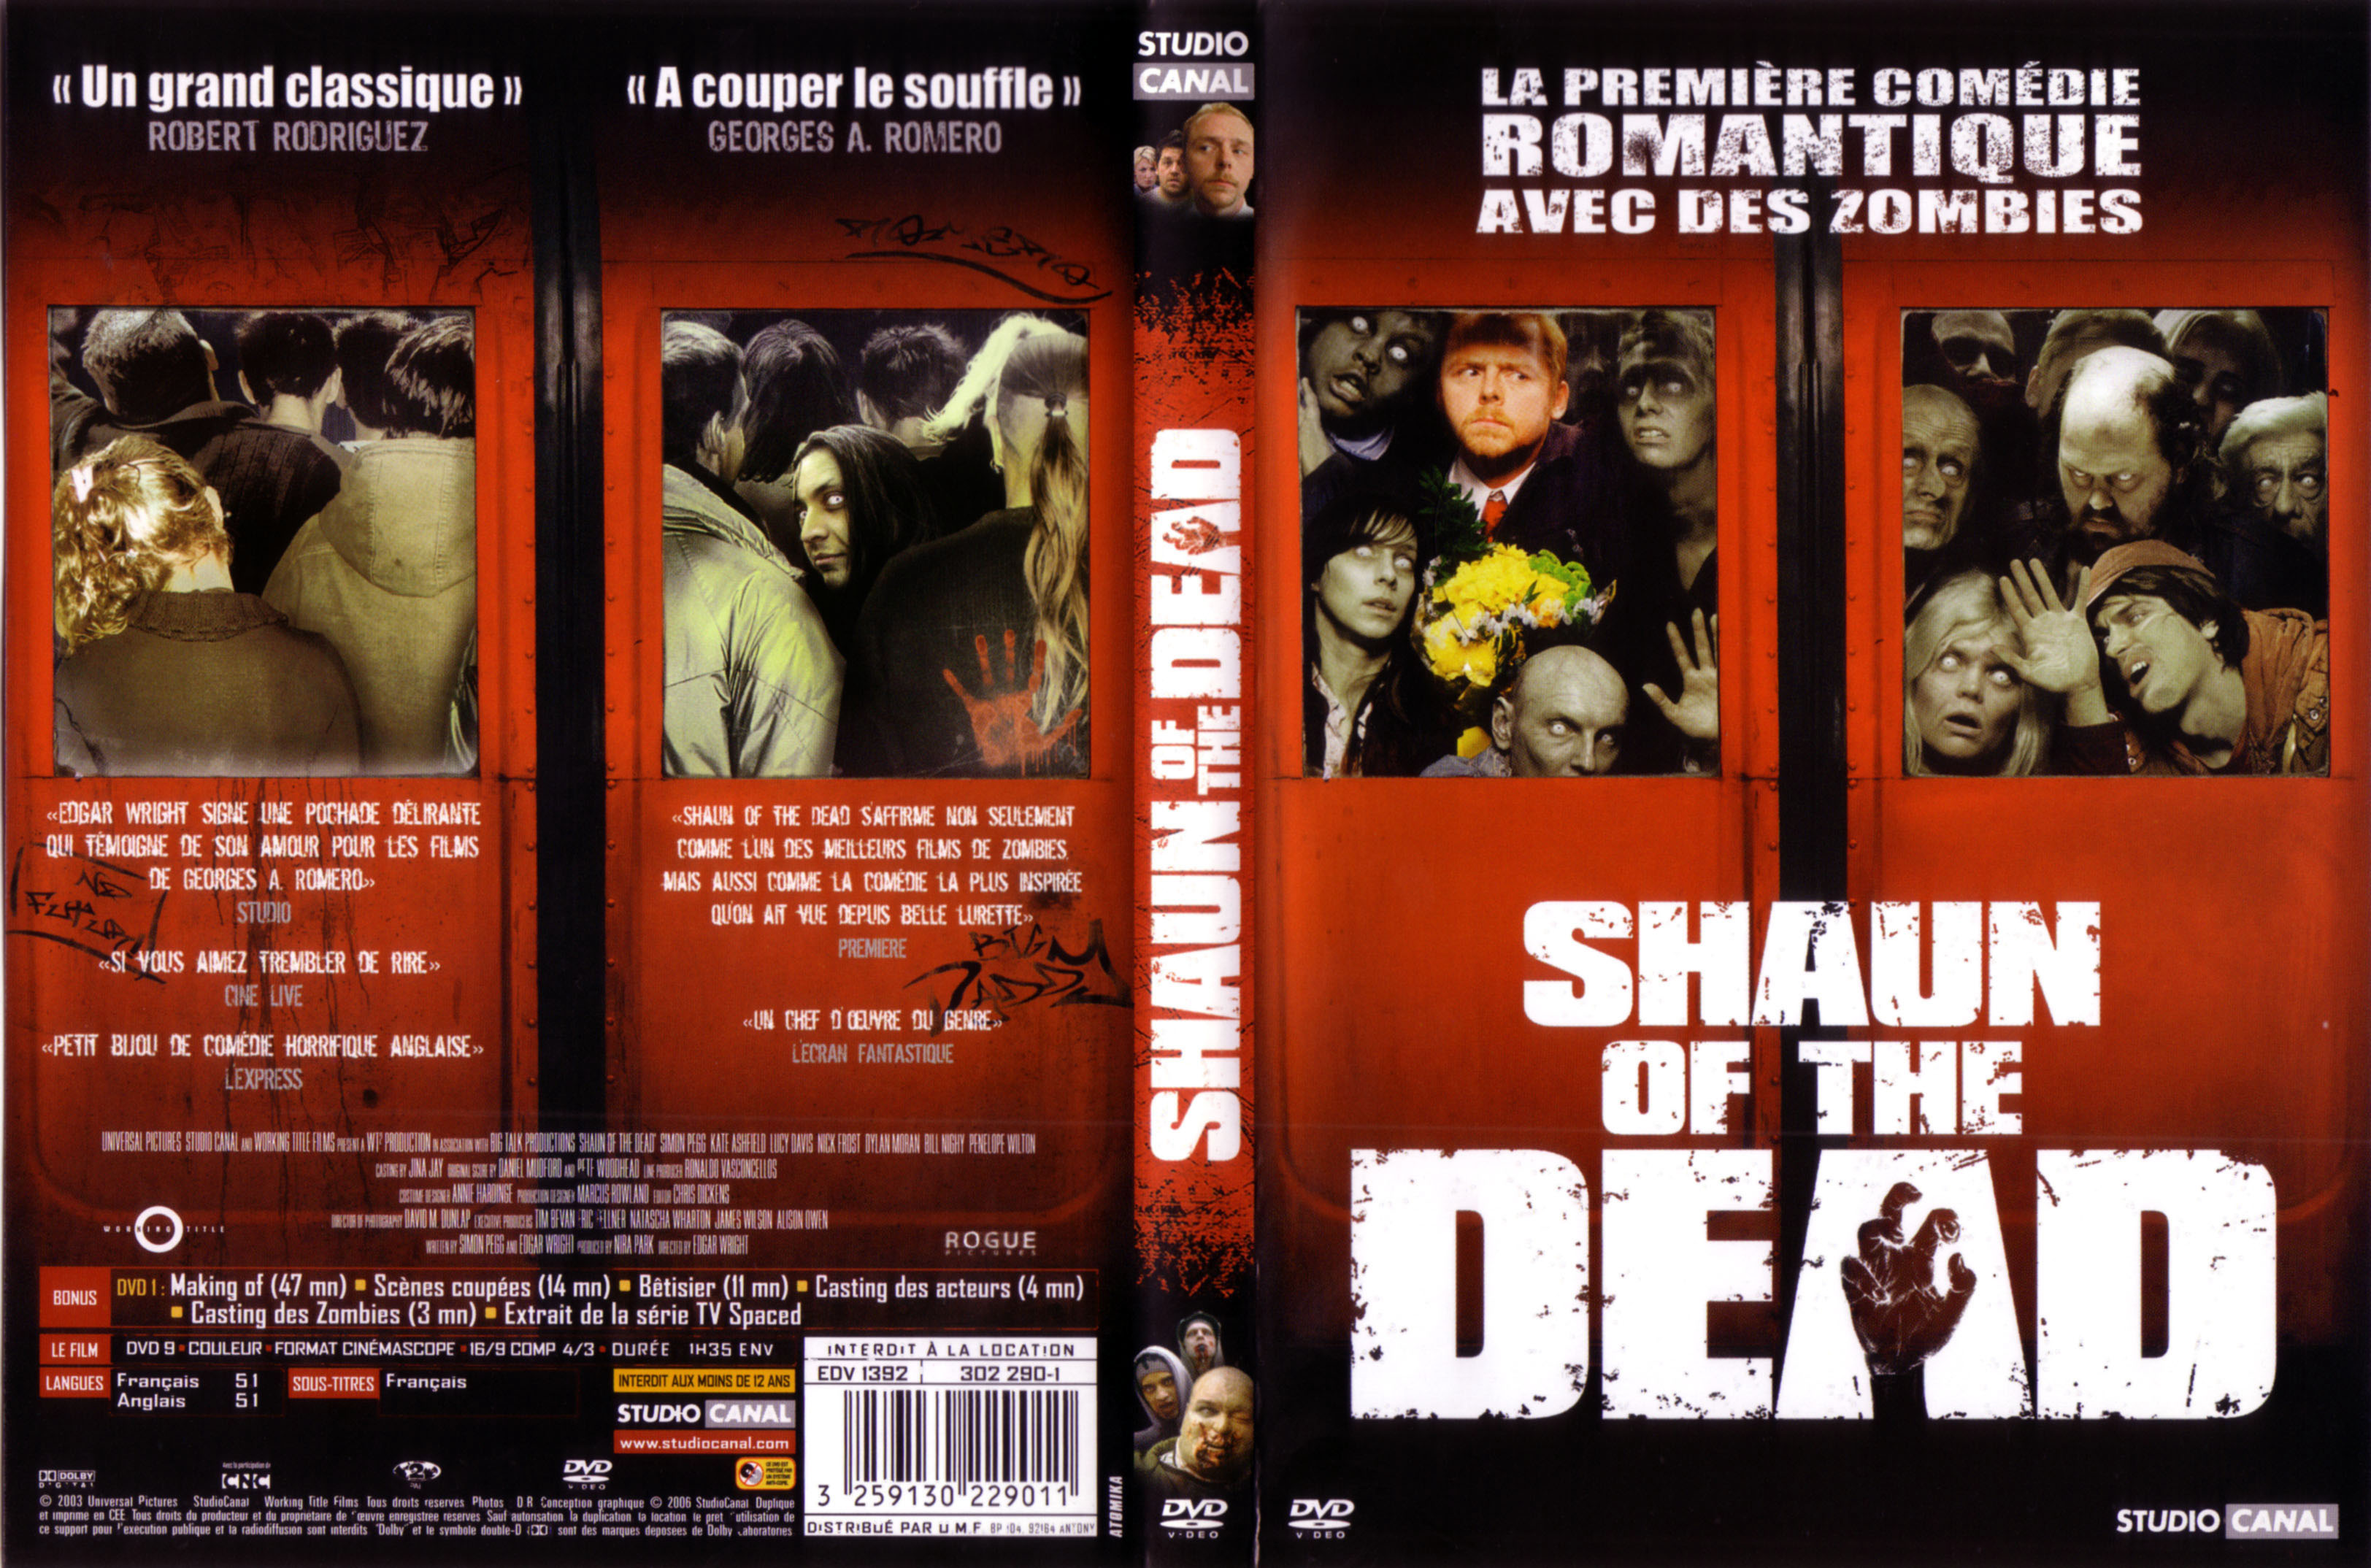 Jaquette DVD Shaun of the dead v2